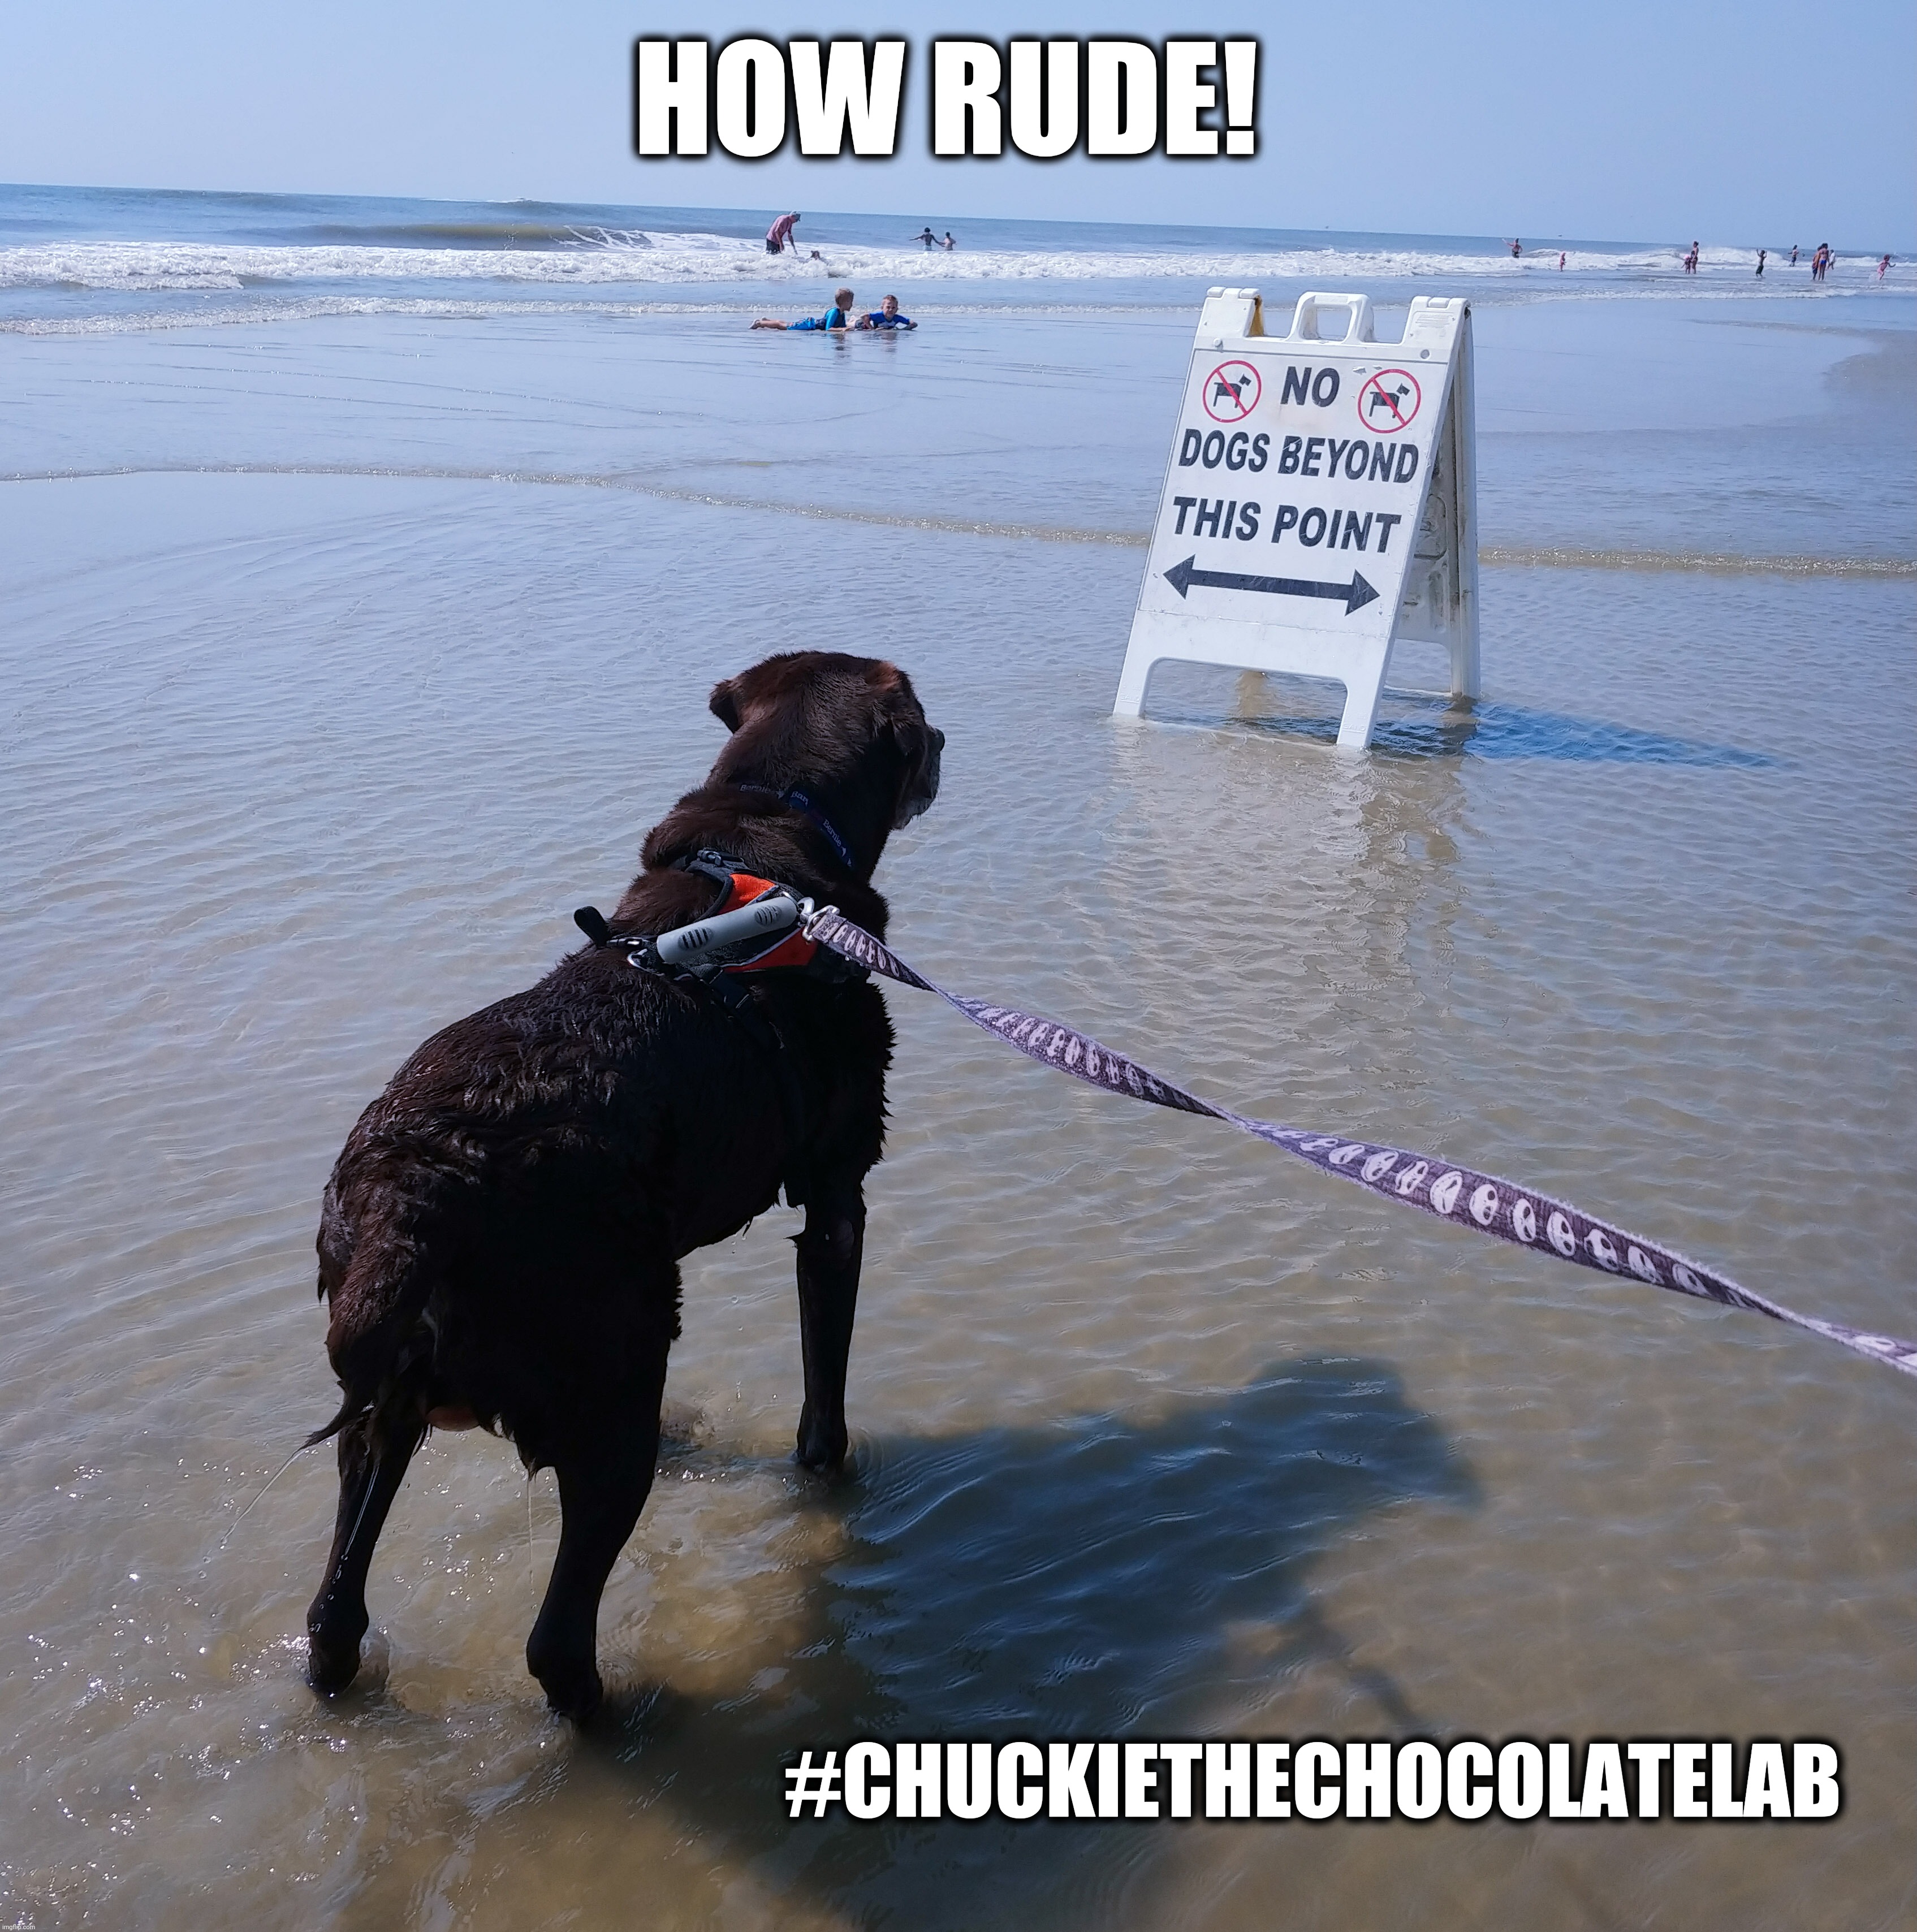 How rude! | HOW RUDE! #CHUCKIETHECHOCOLATELAB | image tagged in chuckie the chocolate lab,how rude,beach,dogs,funny,memes | made w/ Imgflip meme maker